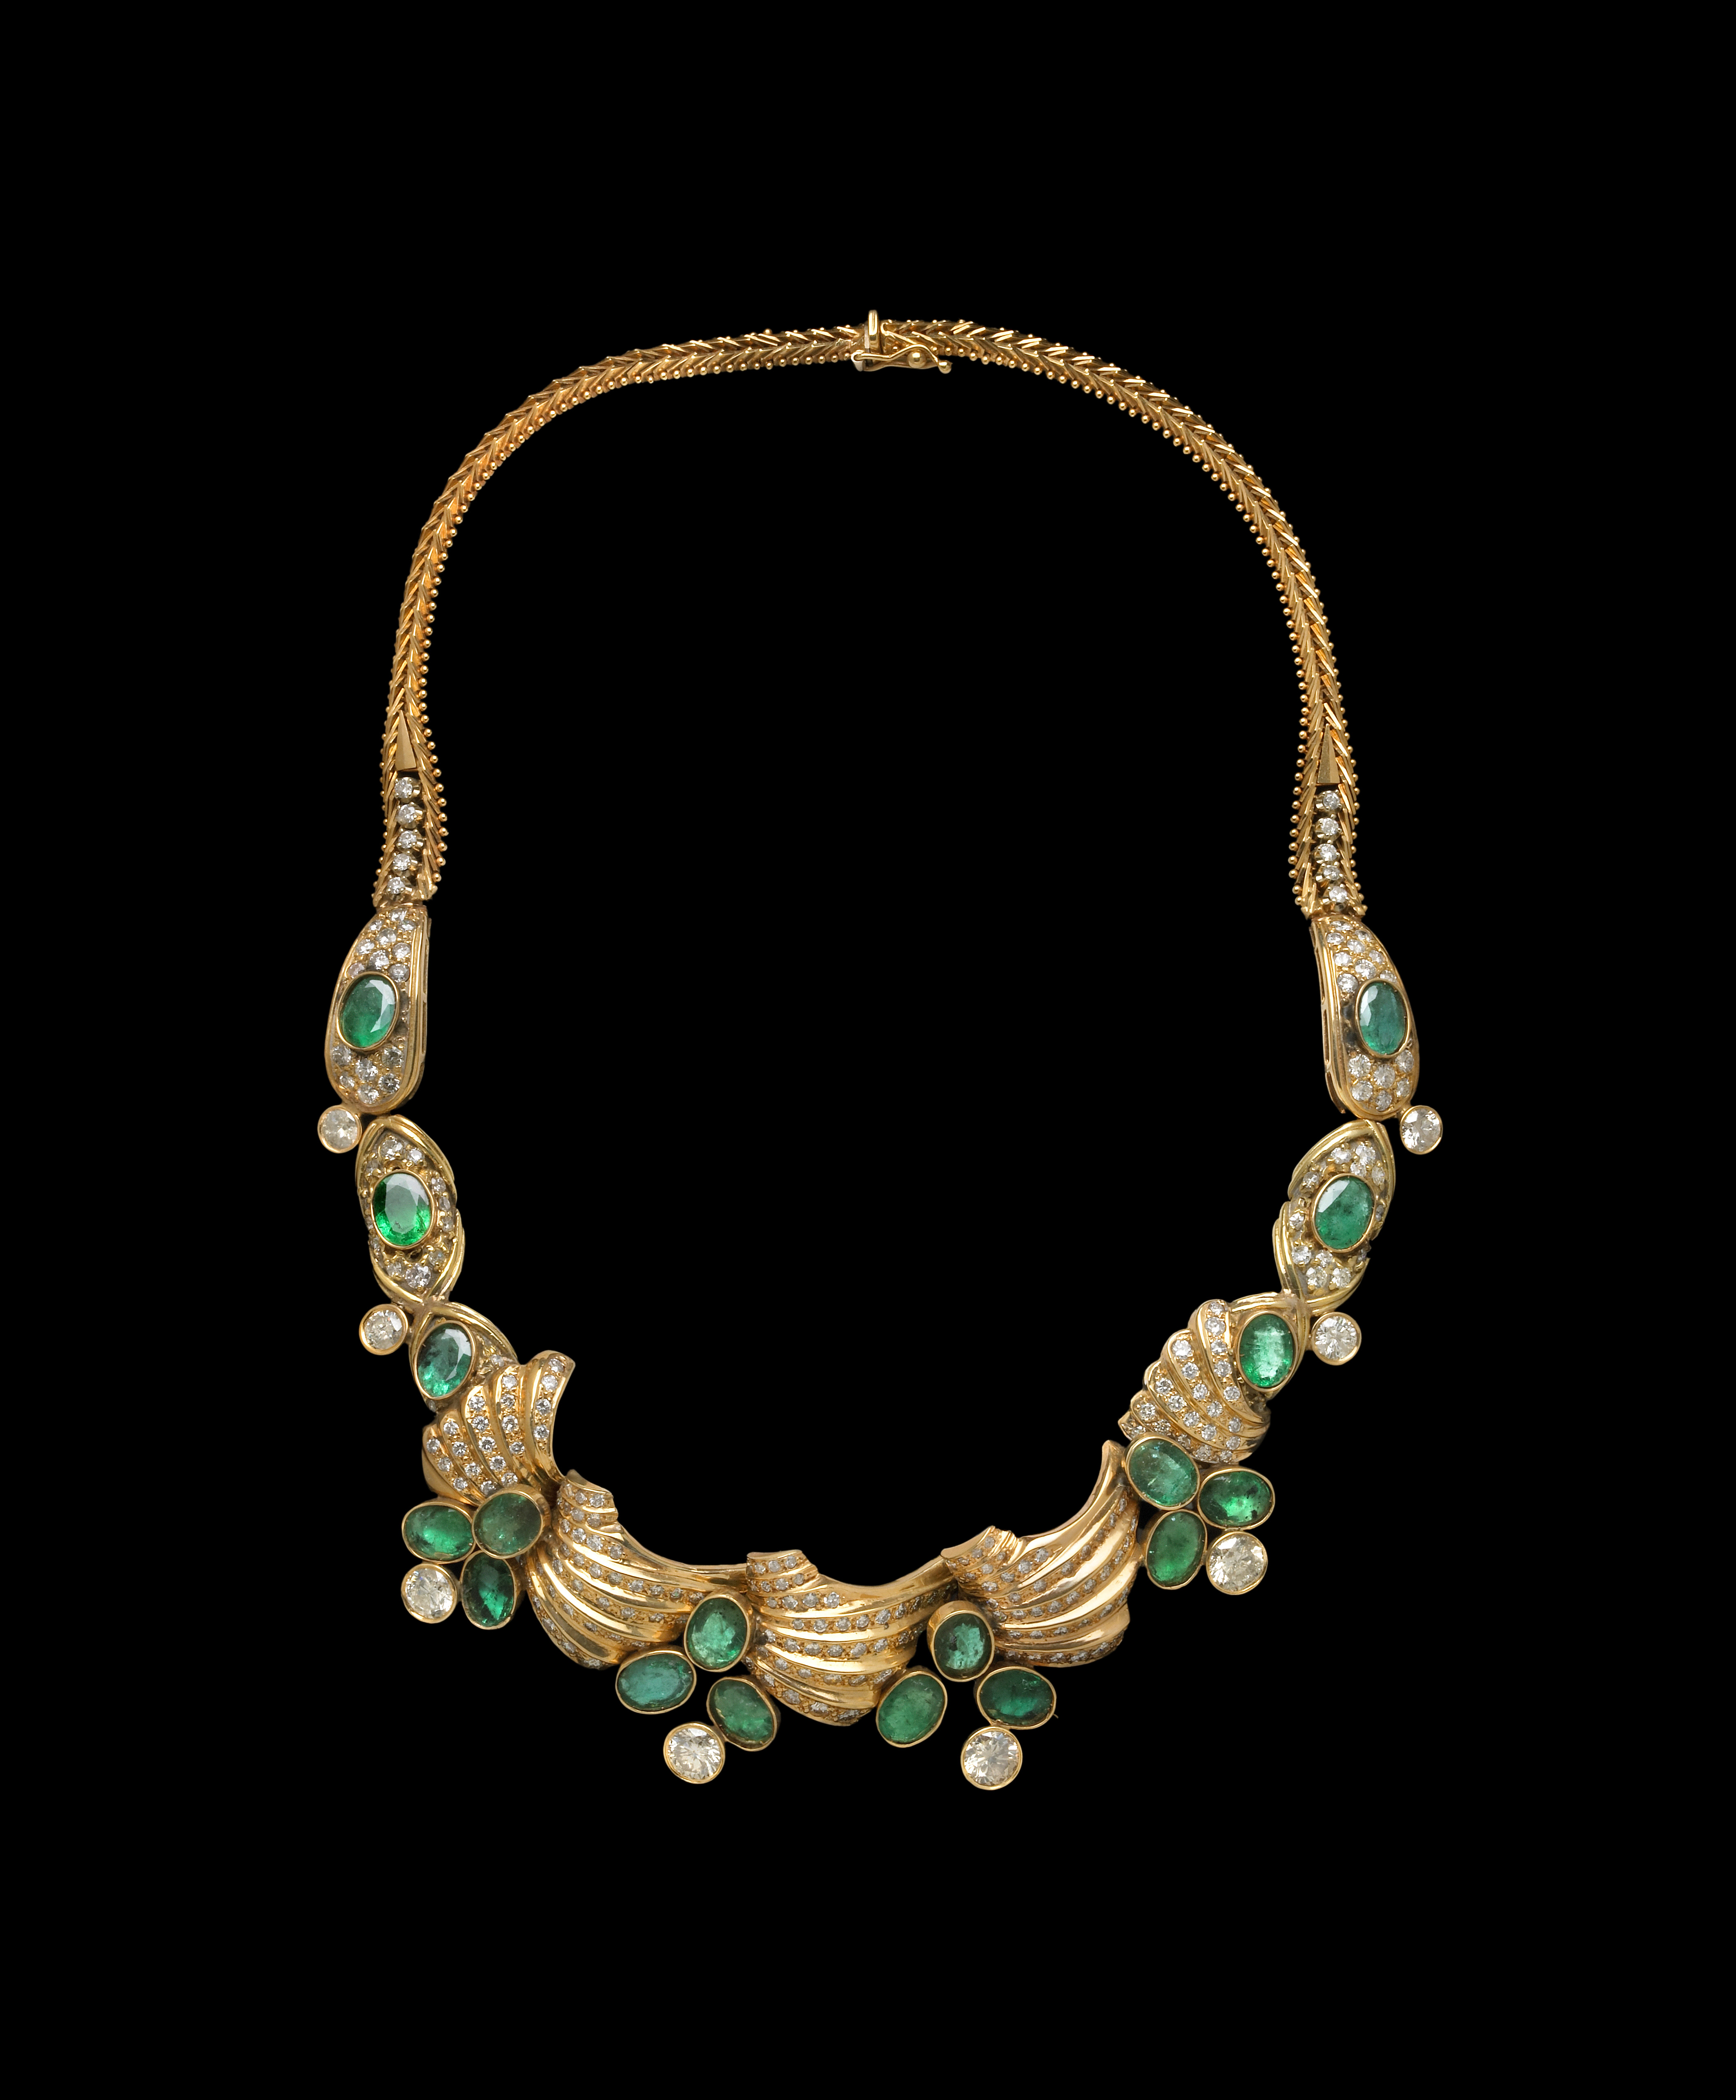 An Emerald and Diamond necklace set in 18-karat Gold, with 18 oval-shaped African emeralds totaling 25 carats and 238 round brilliant-cut Diamonds of various sizes totaling 14.75 carats